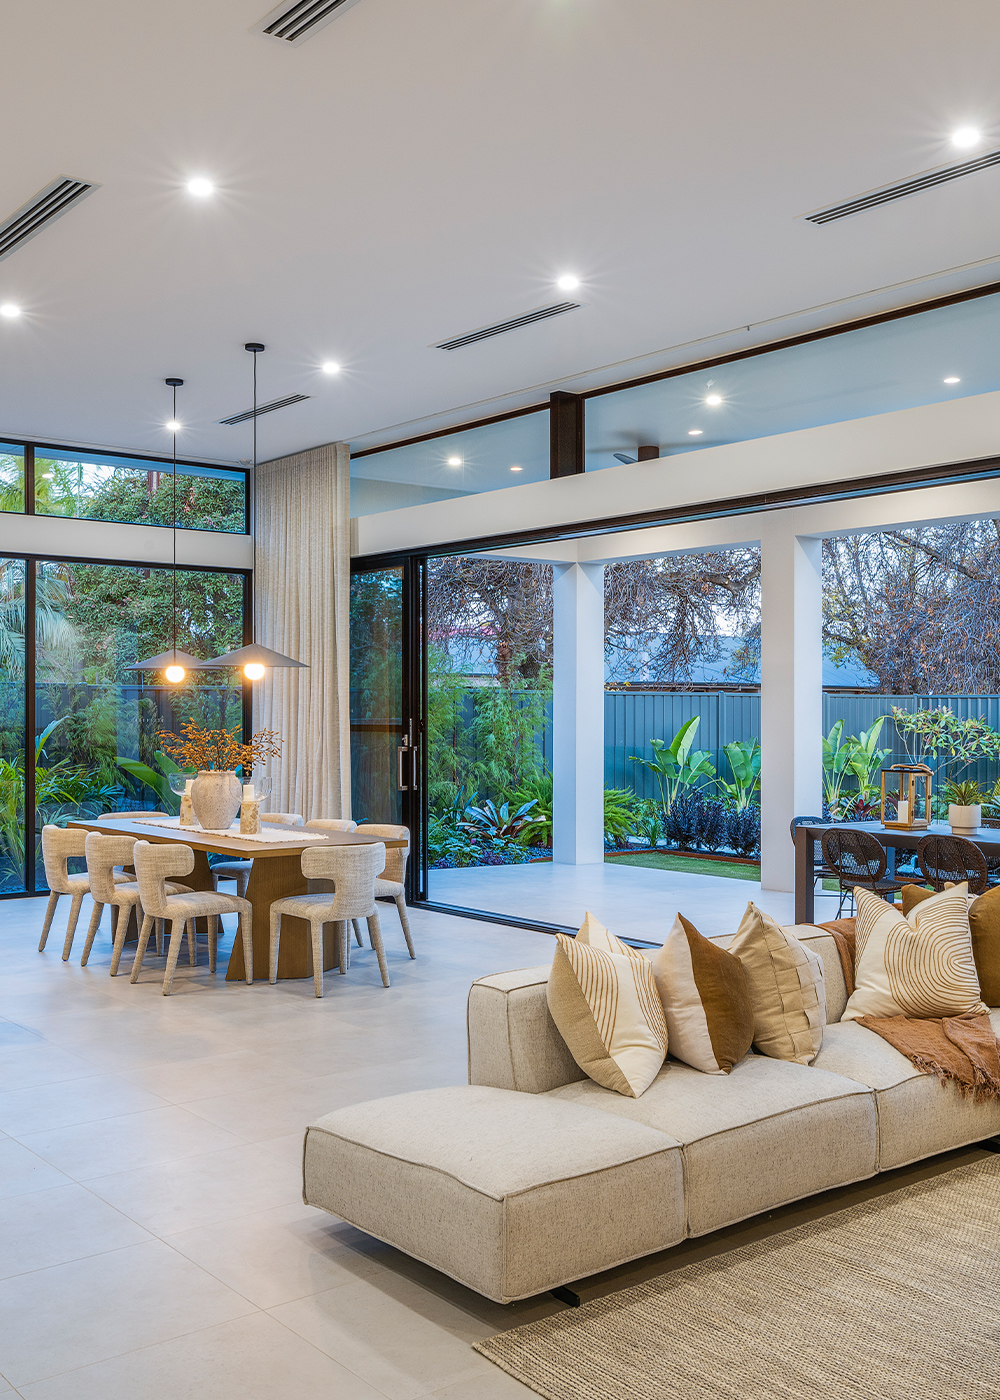 Living and dining area of the open plan living zone, full height windows look out to a lush side garden